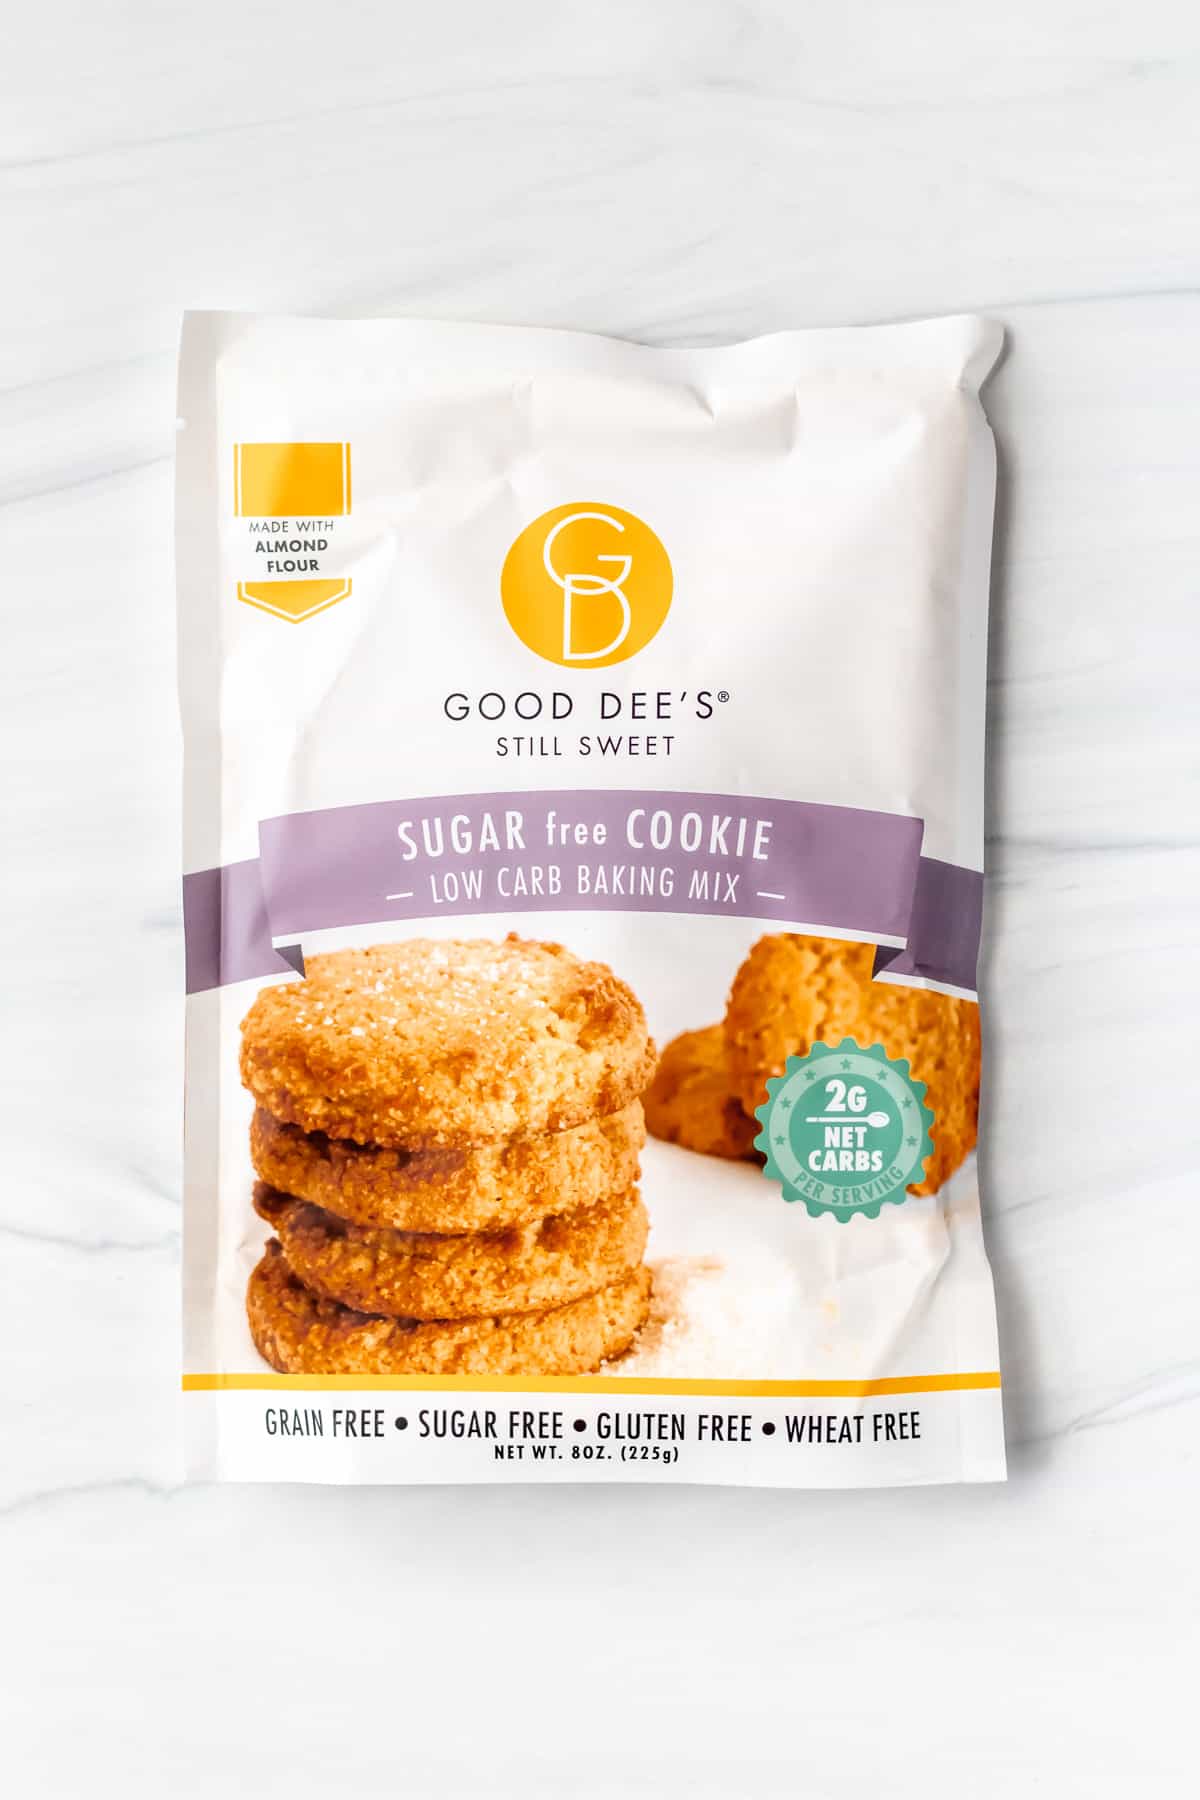 Good Dee's Sugar Free Cookie Low Carb Baking Mix package on a white background